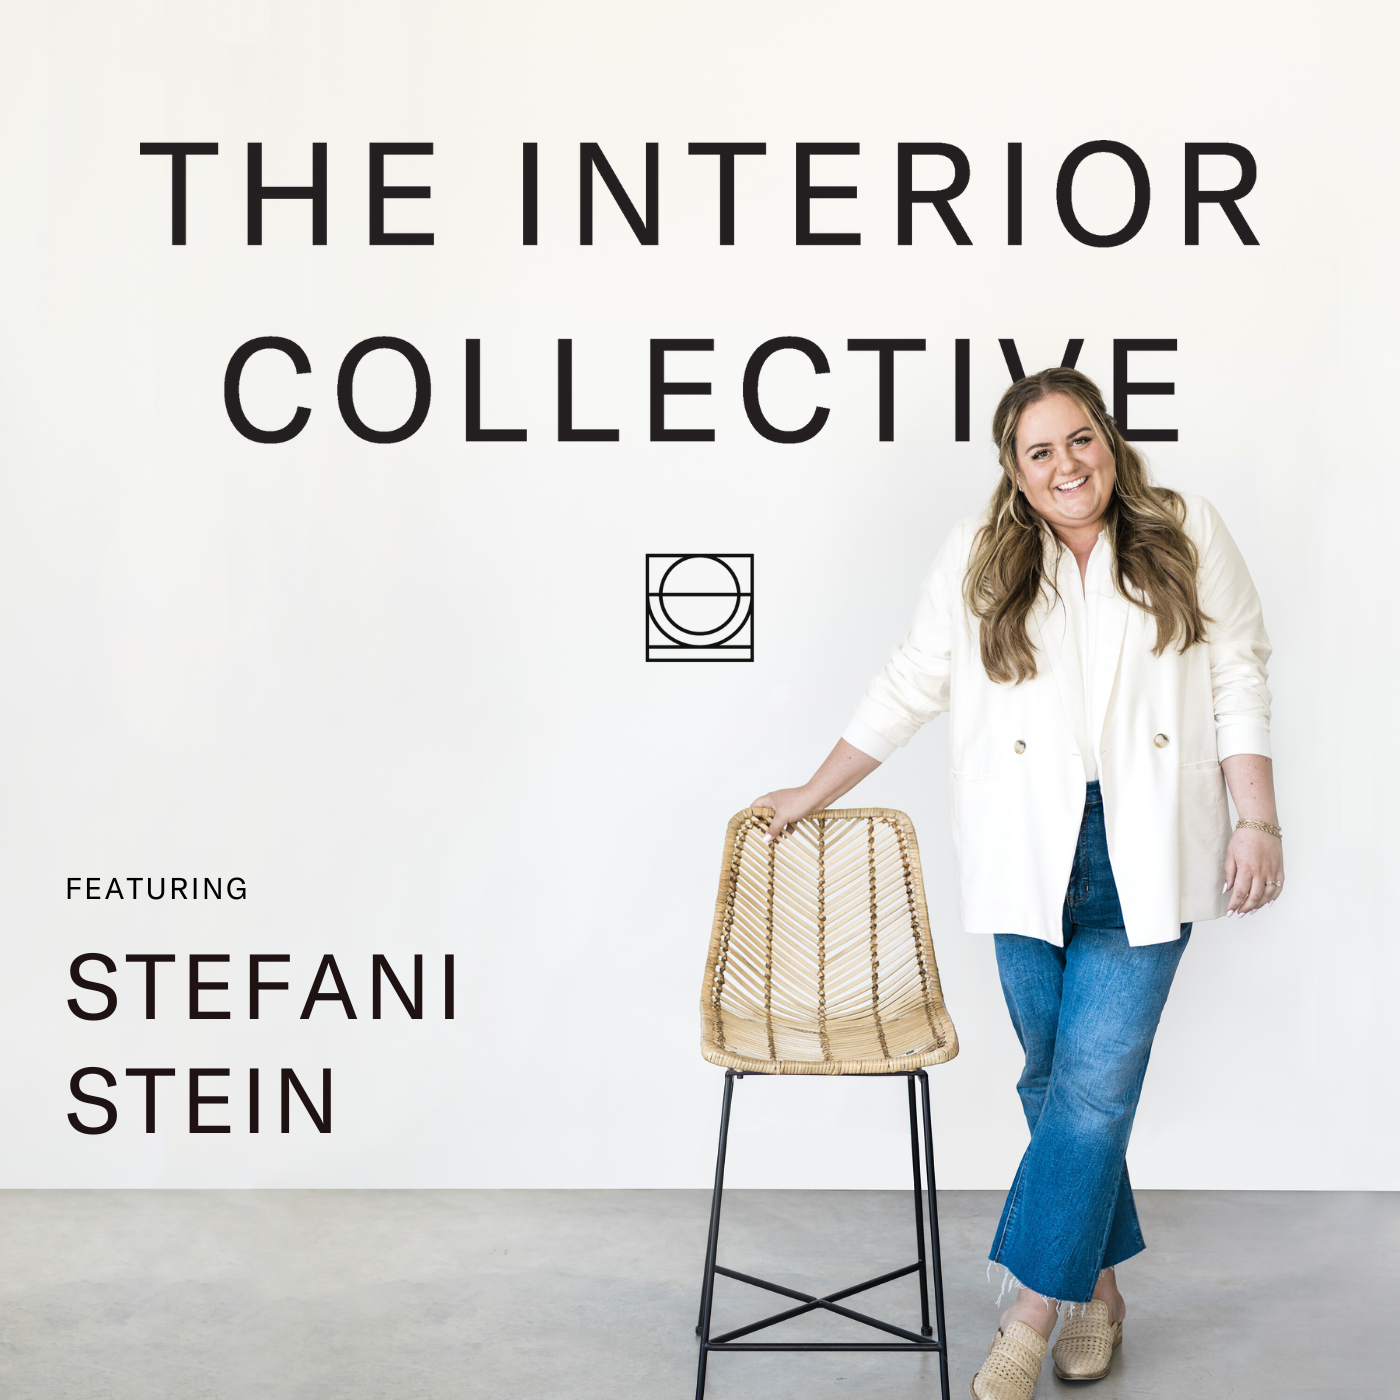 Stefani Stein: Growing a Design Studio While Maintaining a Small Team